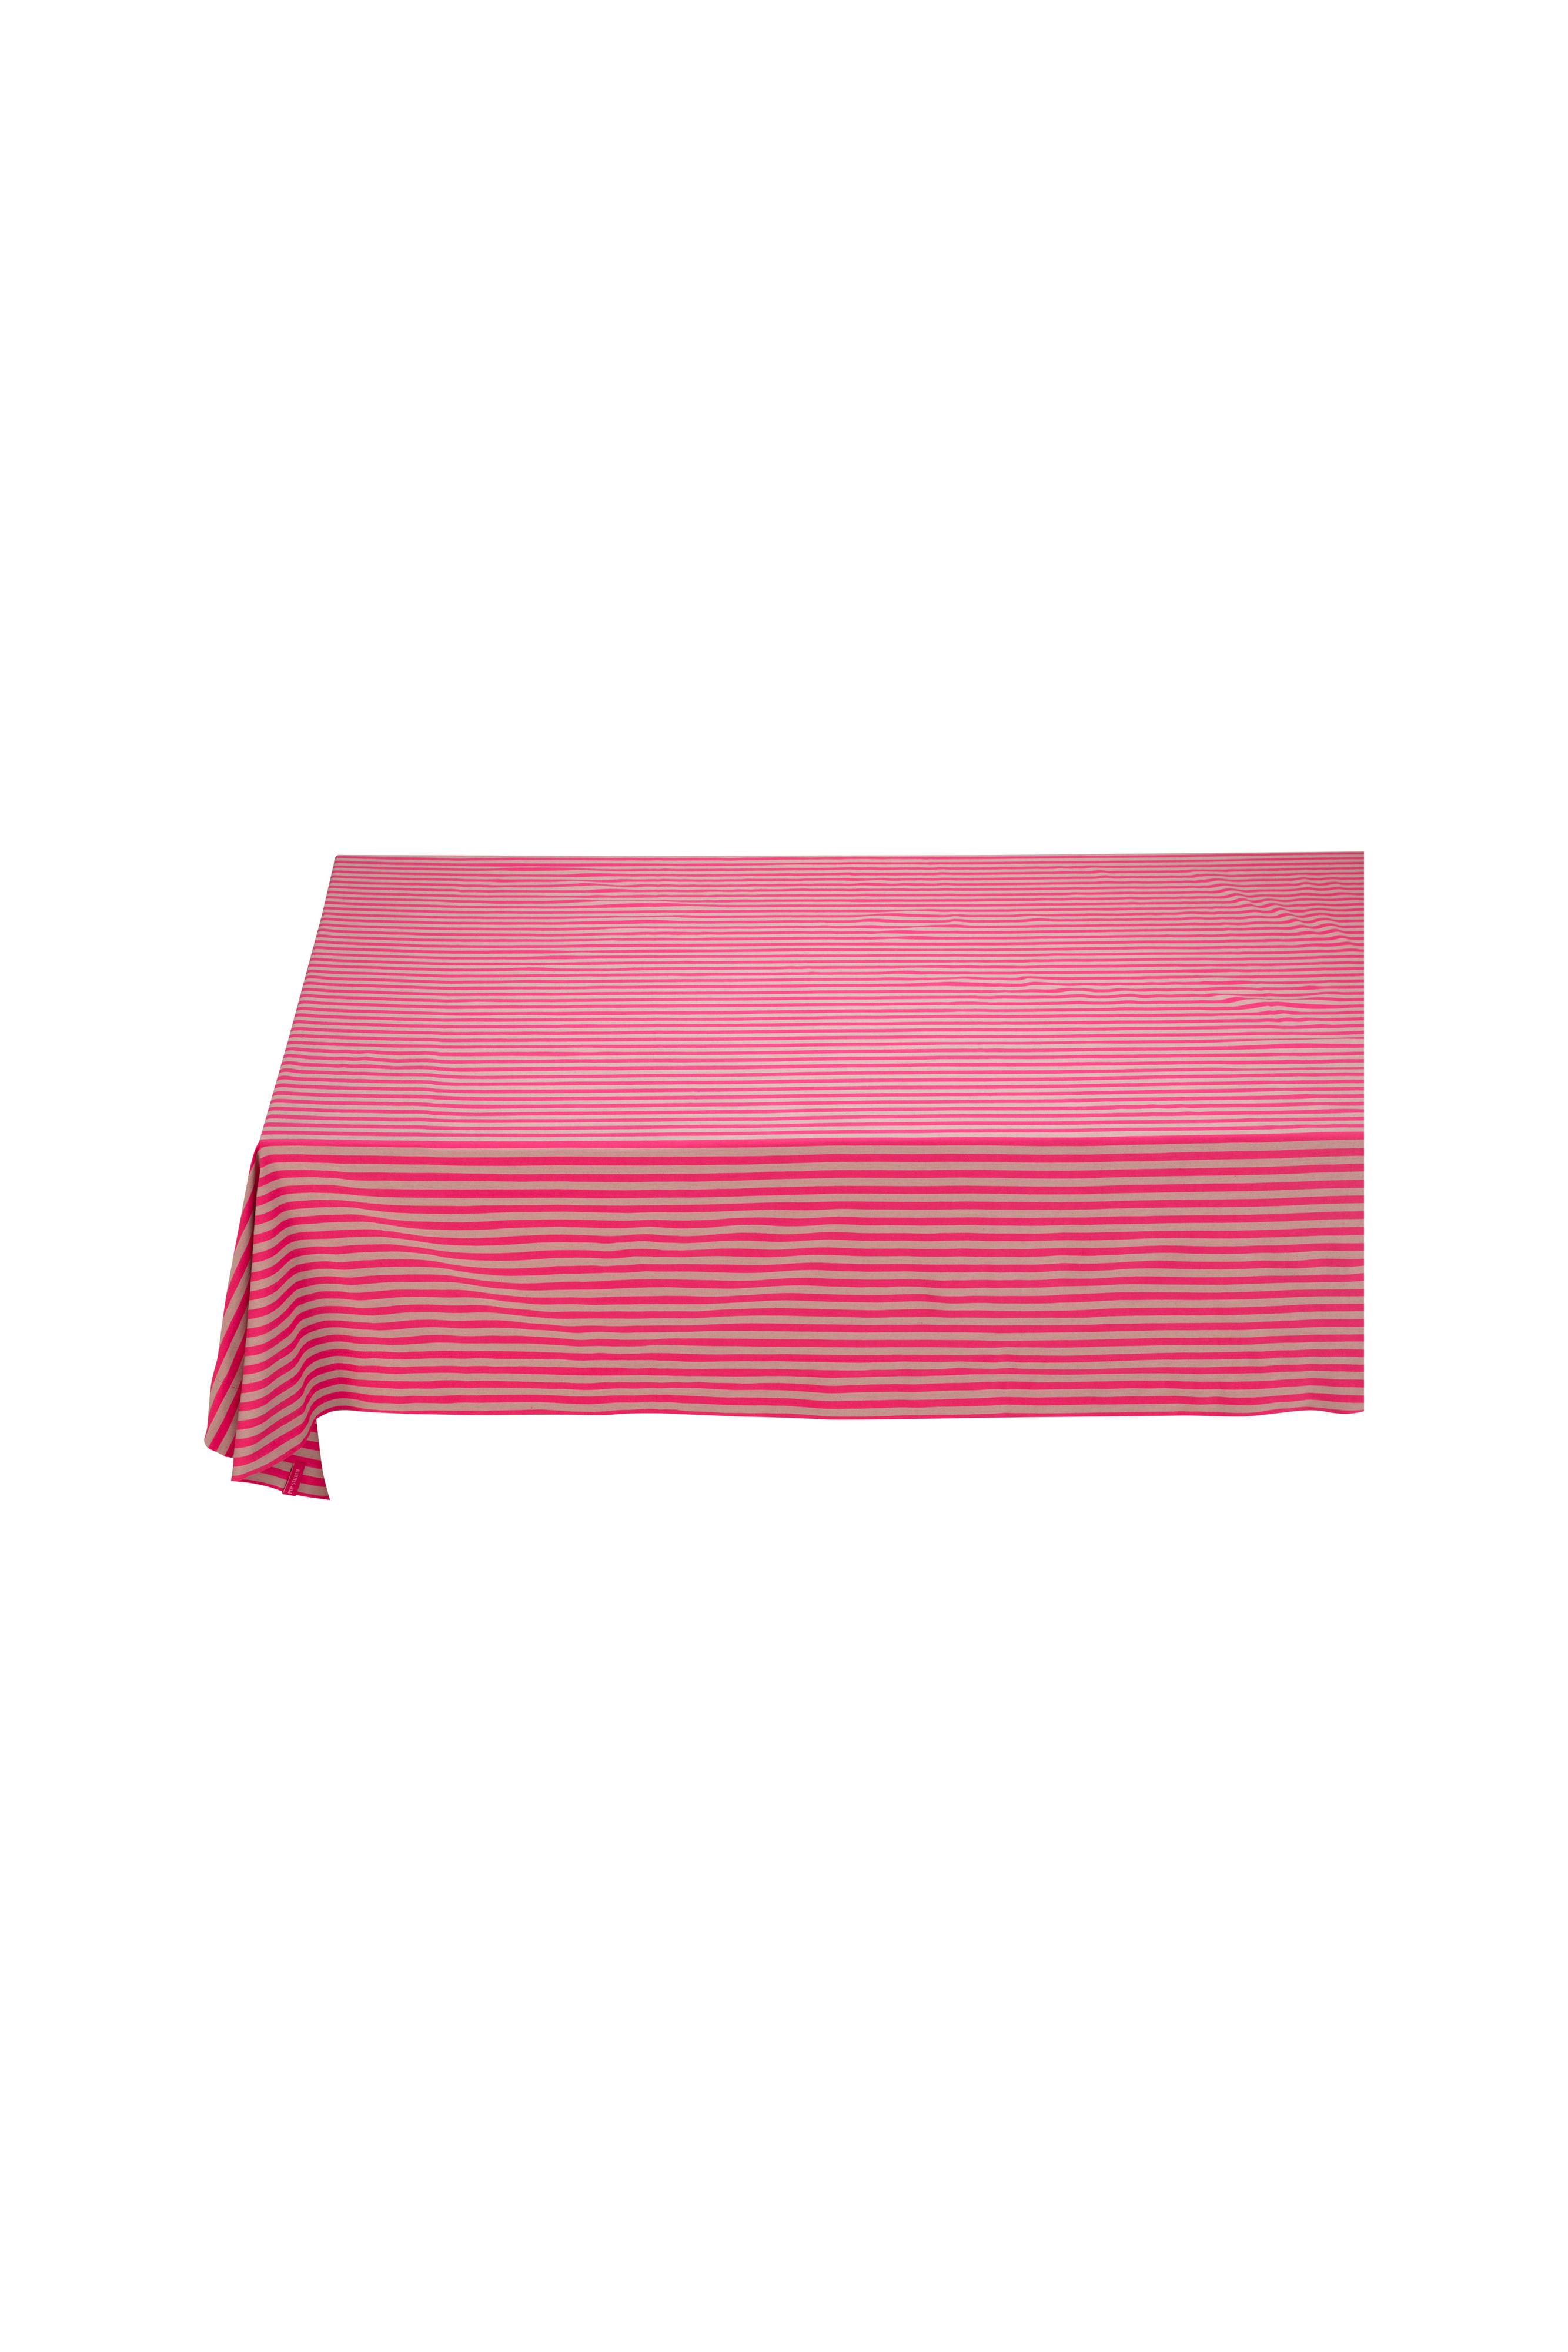 Table Cloth Stripes Pink 160x250cm Gift